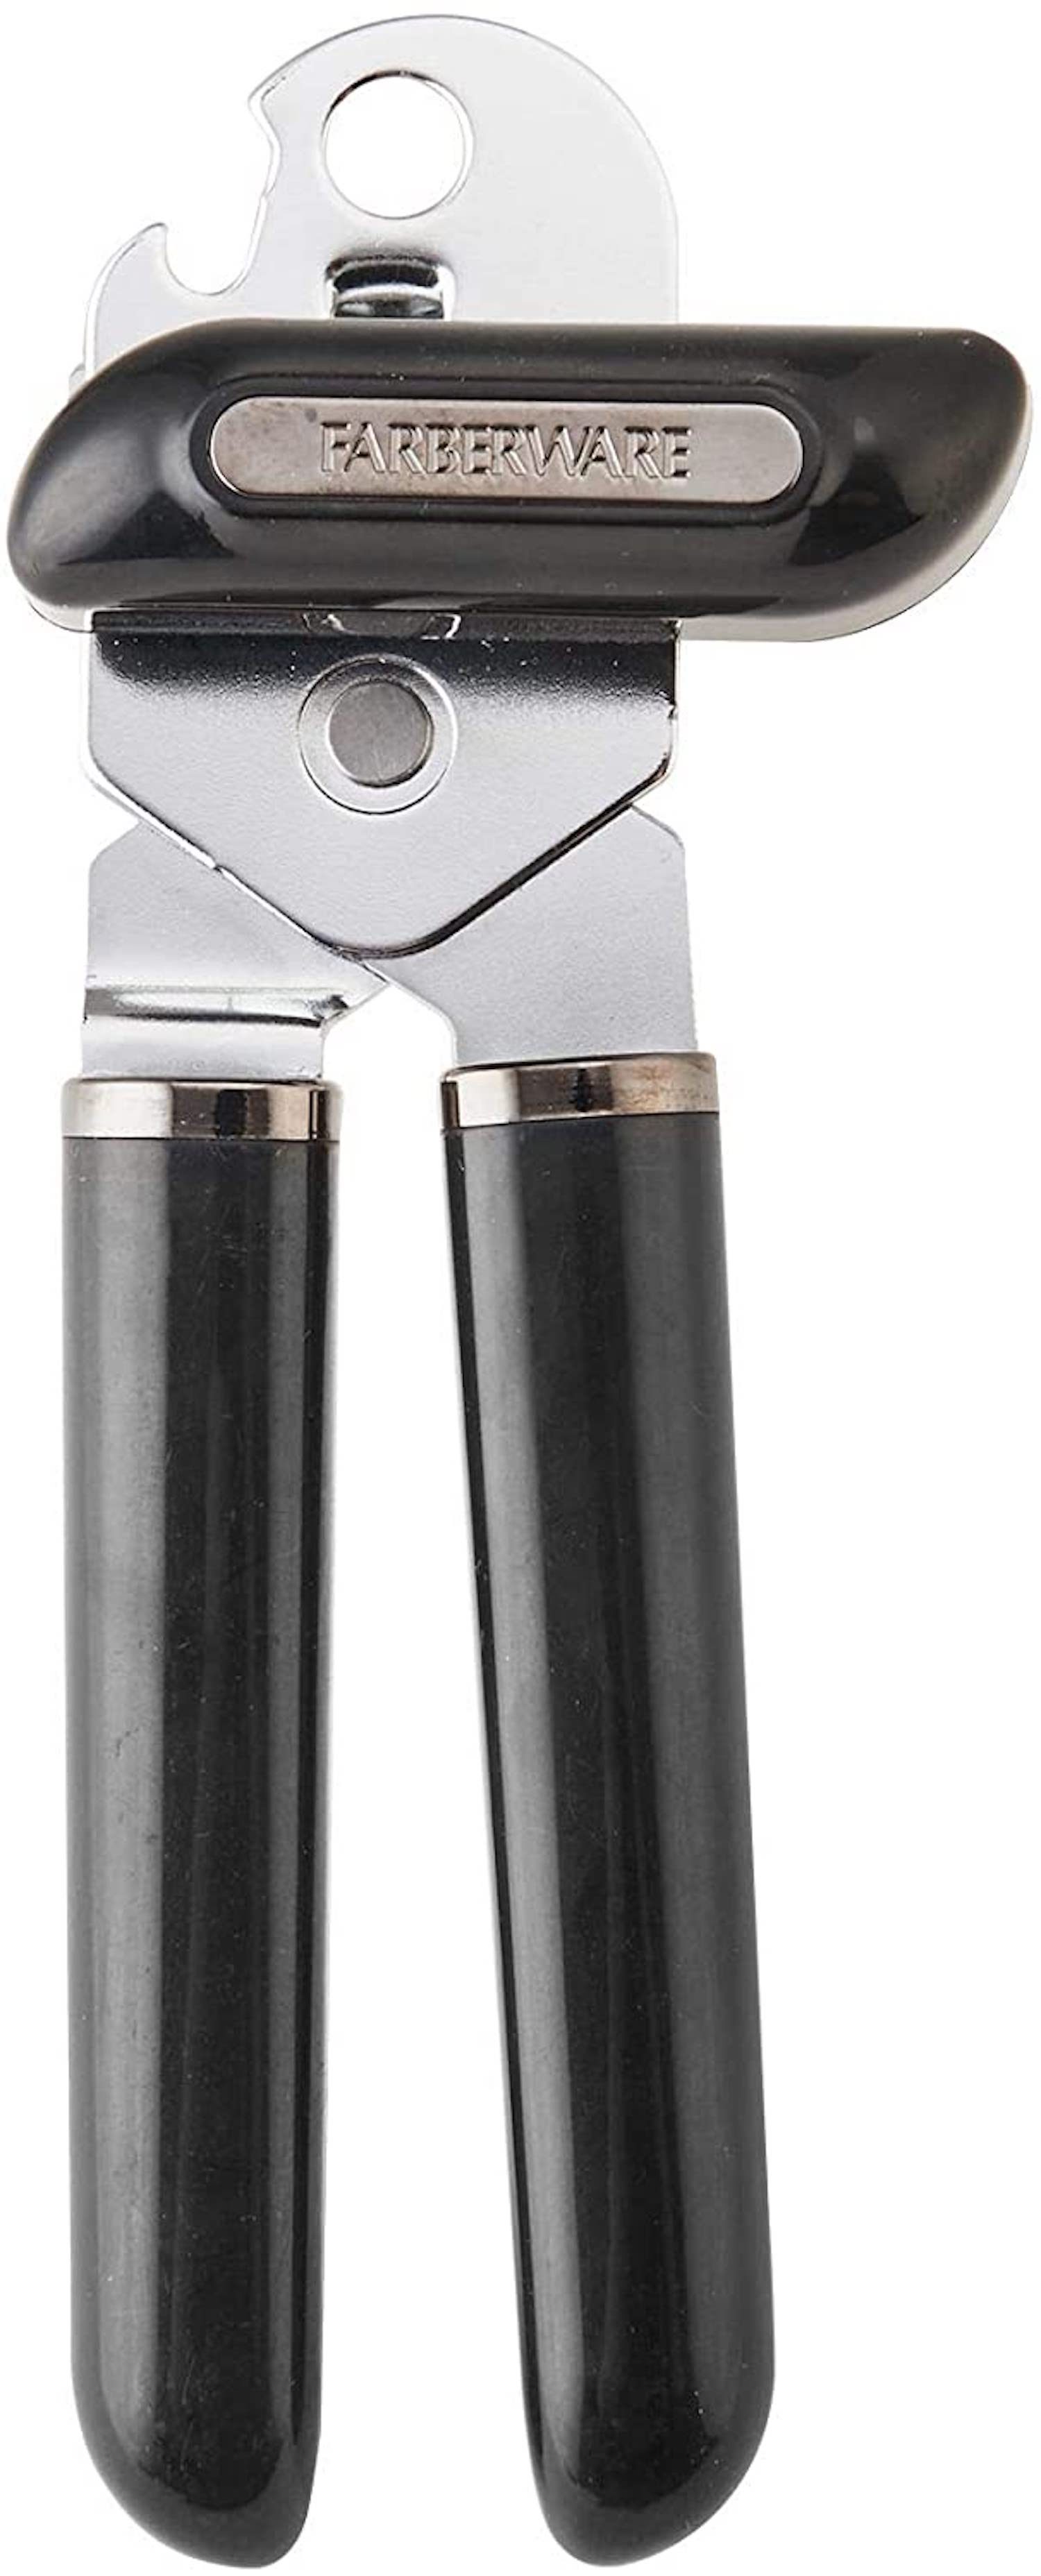  World's Best Can Opener - Made in USA - Sold by Vets - Easy  Turn - Manual Can Opener : Home & Kitchen